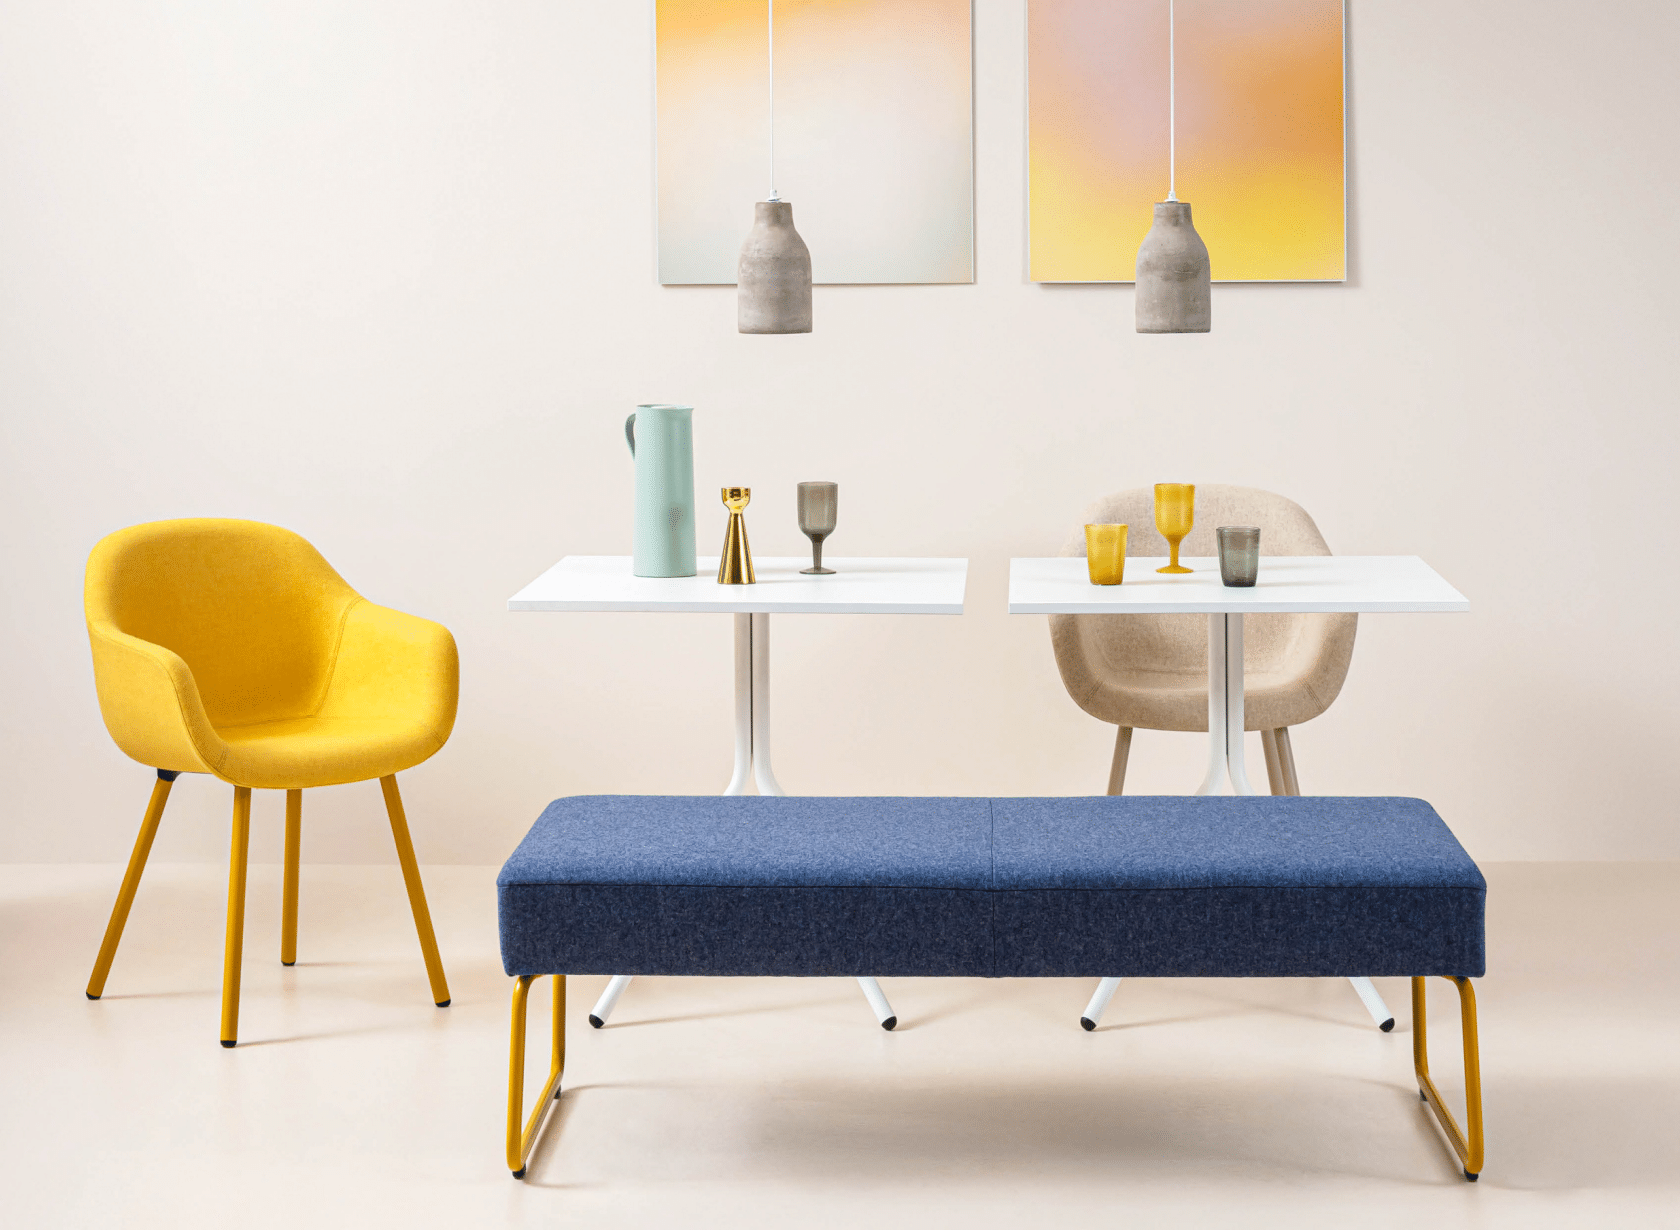 A stylish ensemble featuring a yellow chair, beige chair, and blue bench surrounding two small, white tables, from Dauphin's Fiore collection.